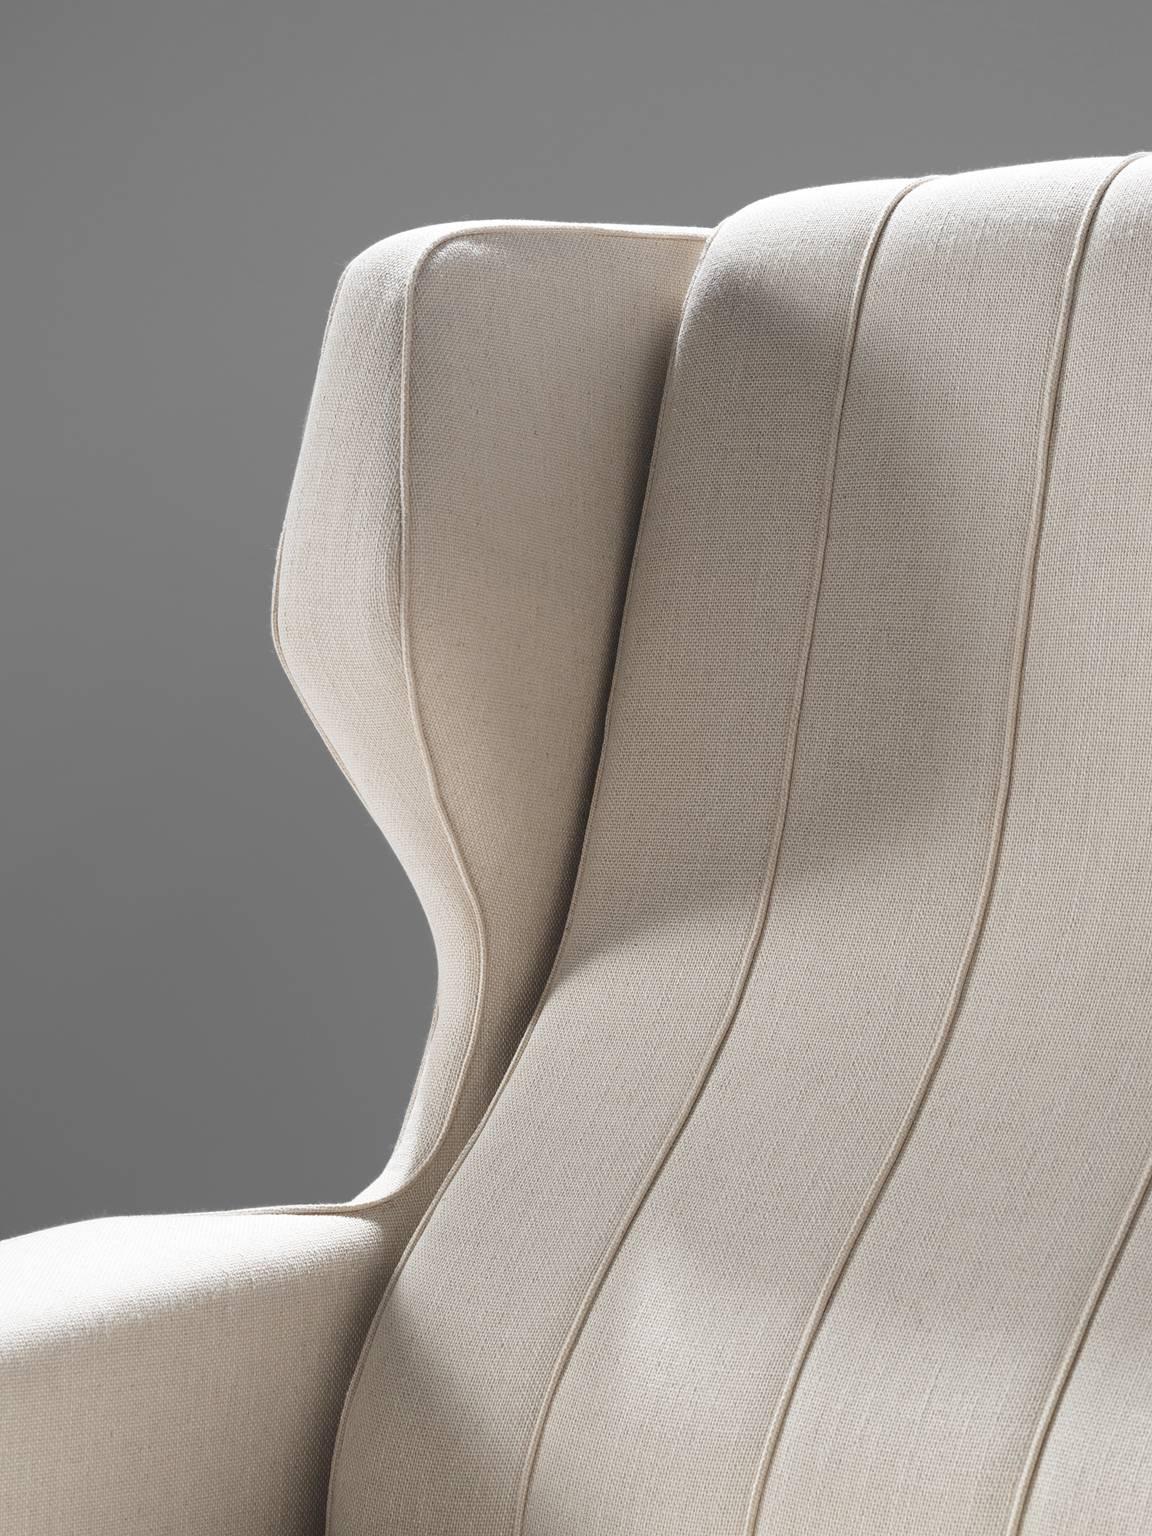 Gianfranco Frattini Reupholstered Lounge Chair for Cassina 1